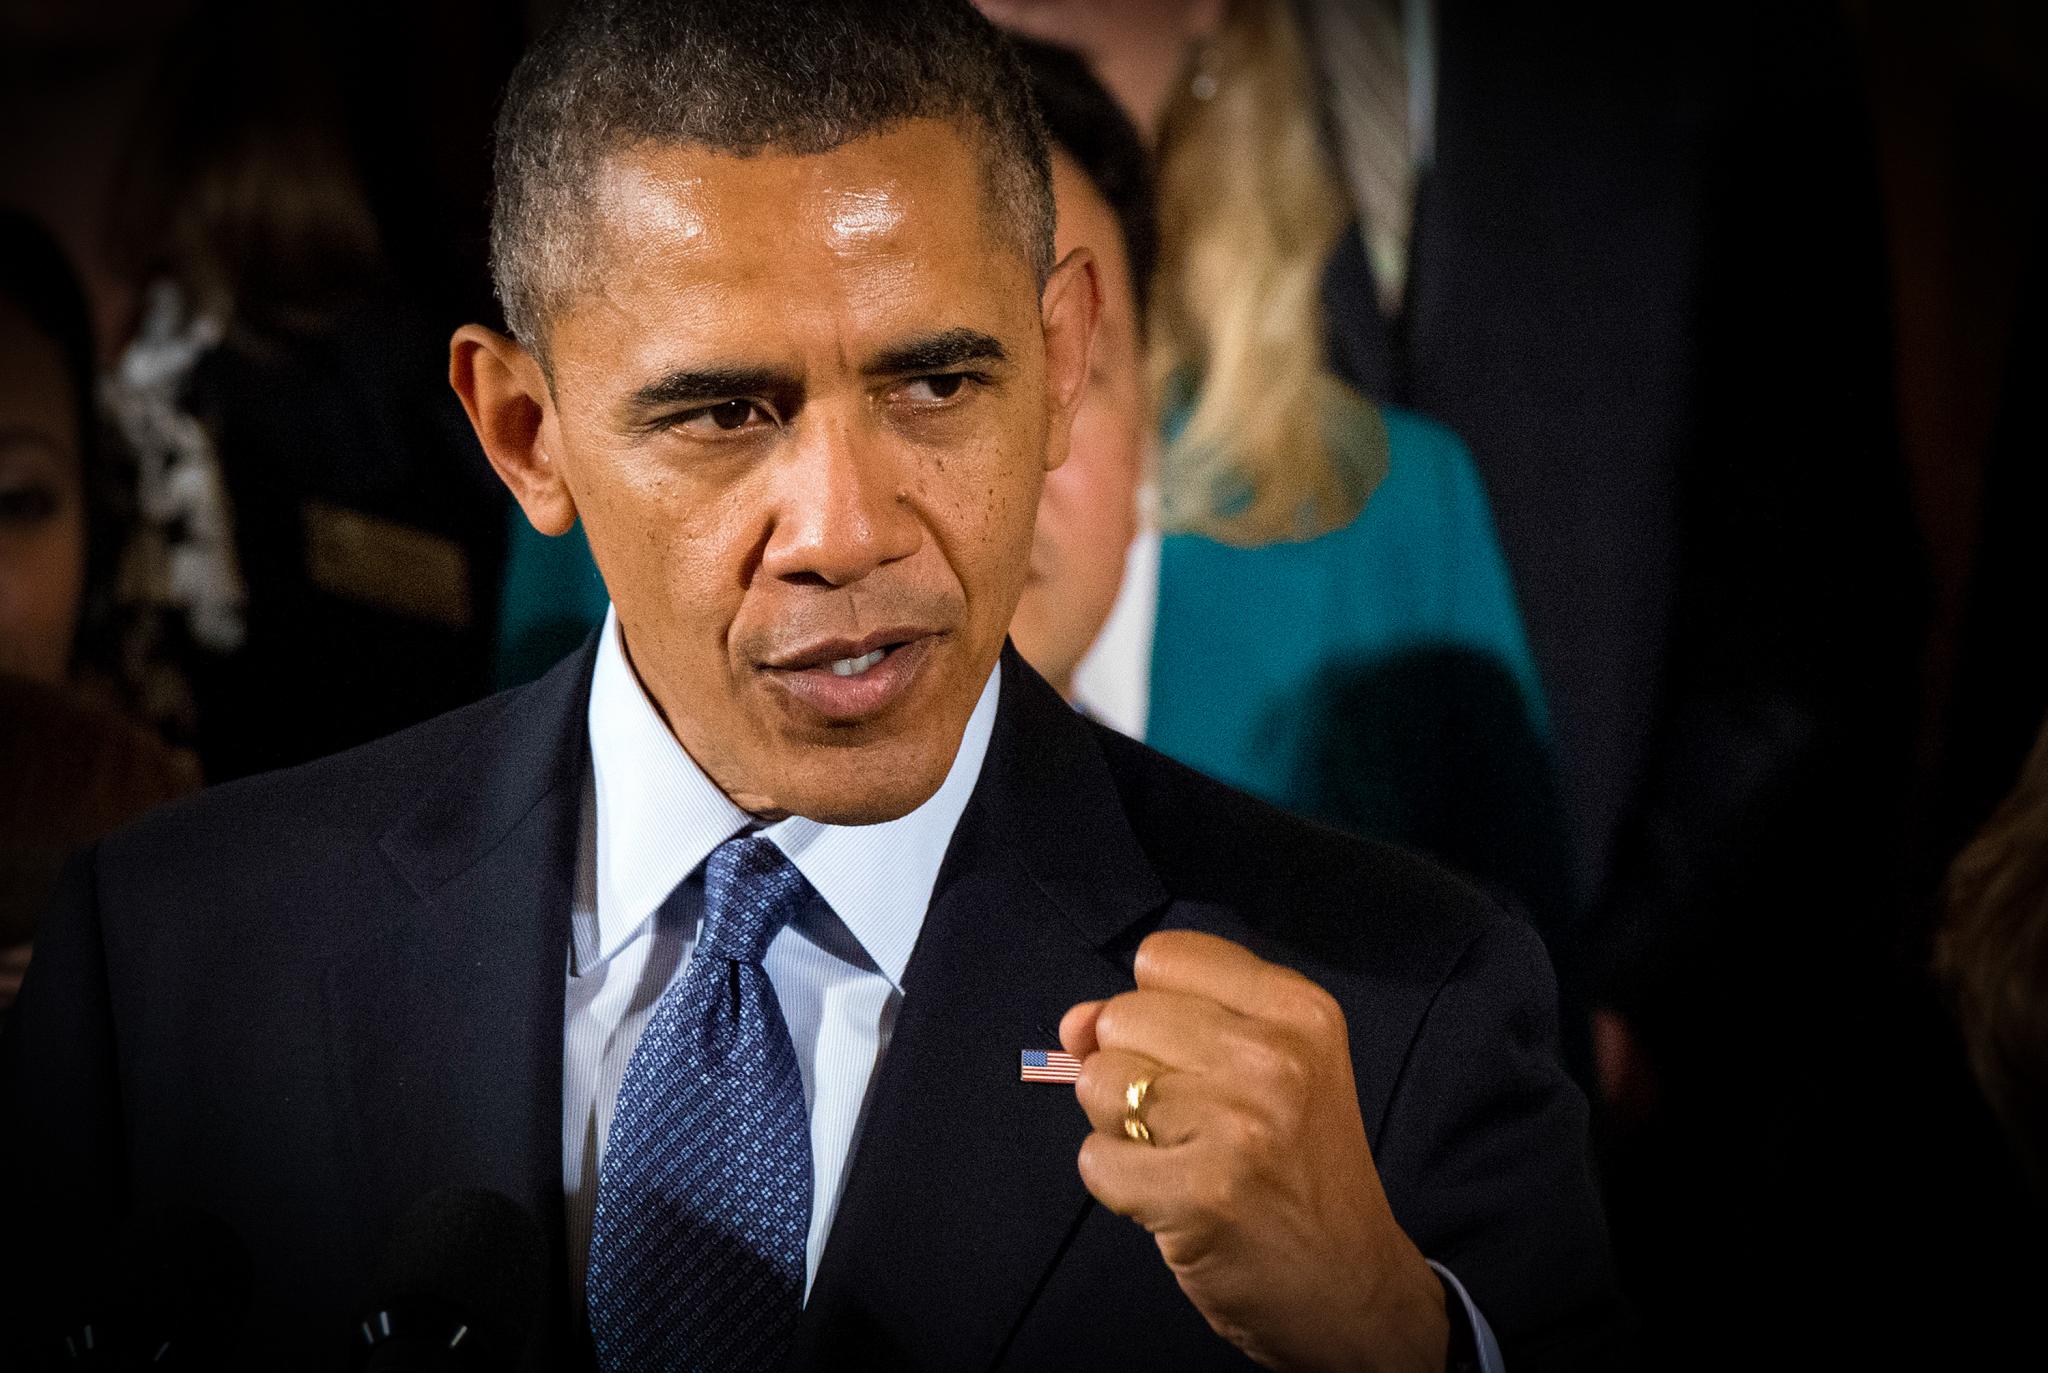 What Do You Think About President Obama's Year of Action?